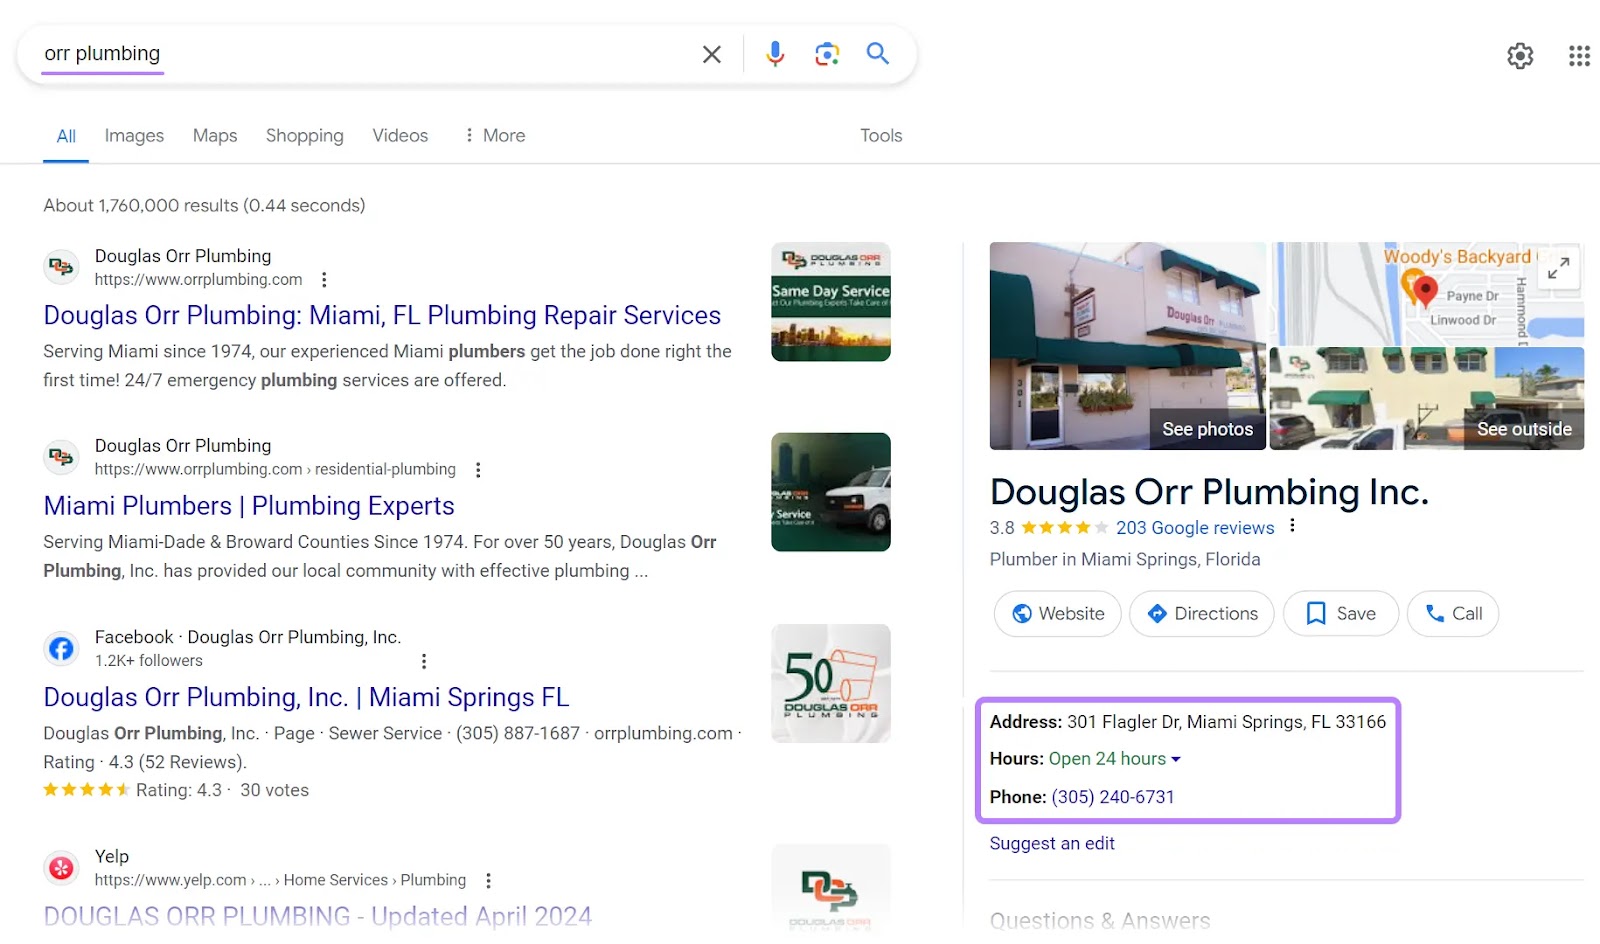 address, operating hours, and phone number highlighted on SERP for Douglas Orr Plumbing Inc.